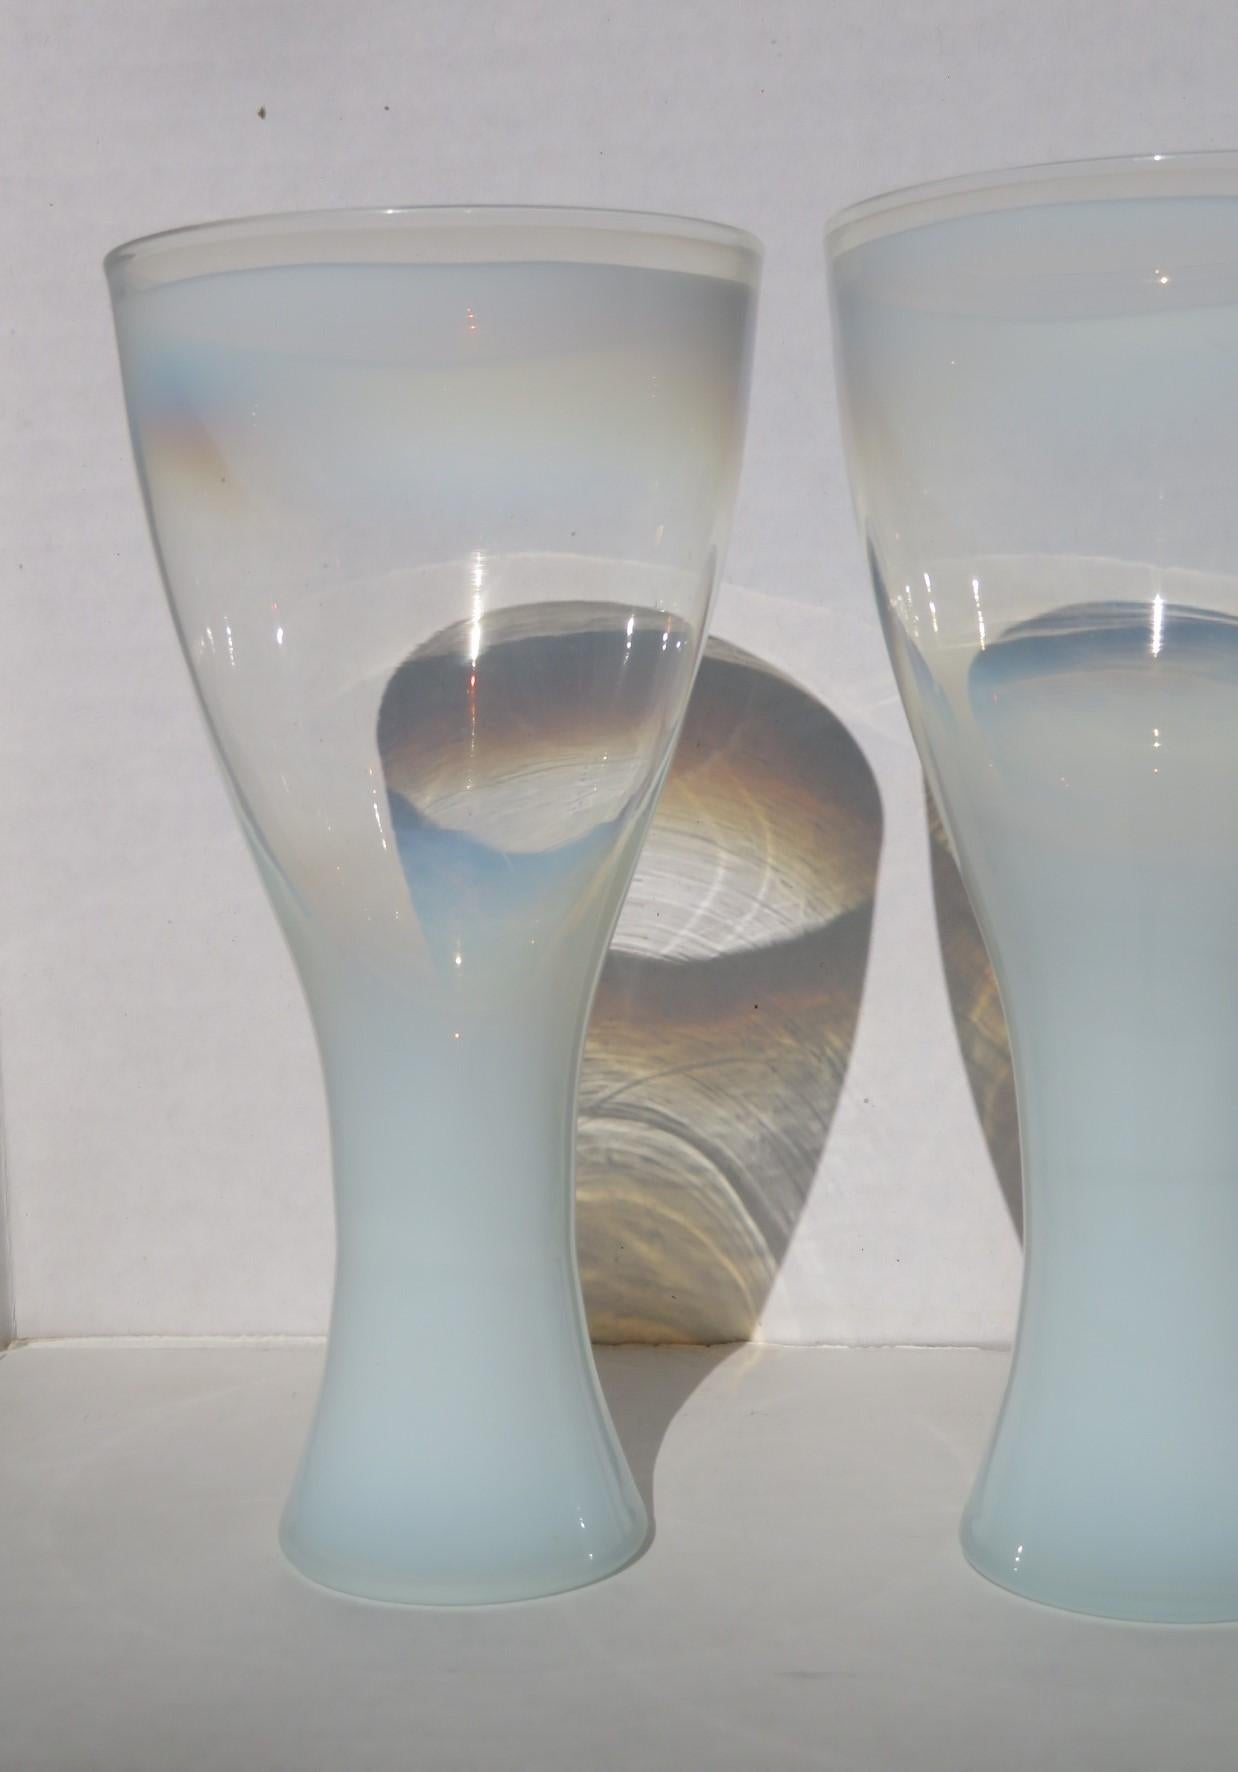 Mid-20th Century Theme Formal Line Footed Glasses Designed by Russel Wright for Yamato China 60's